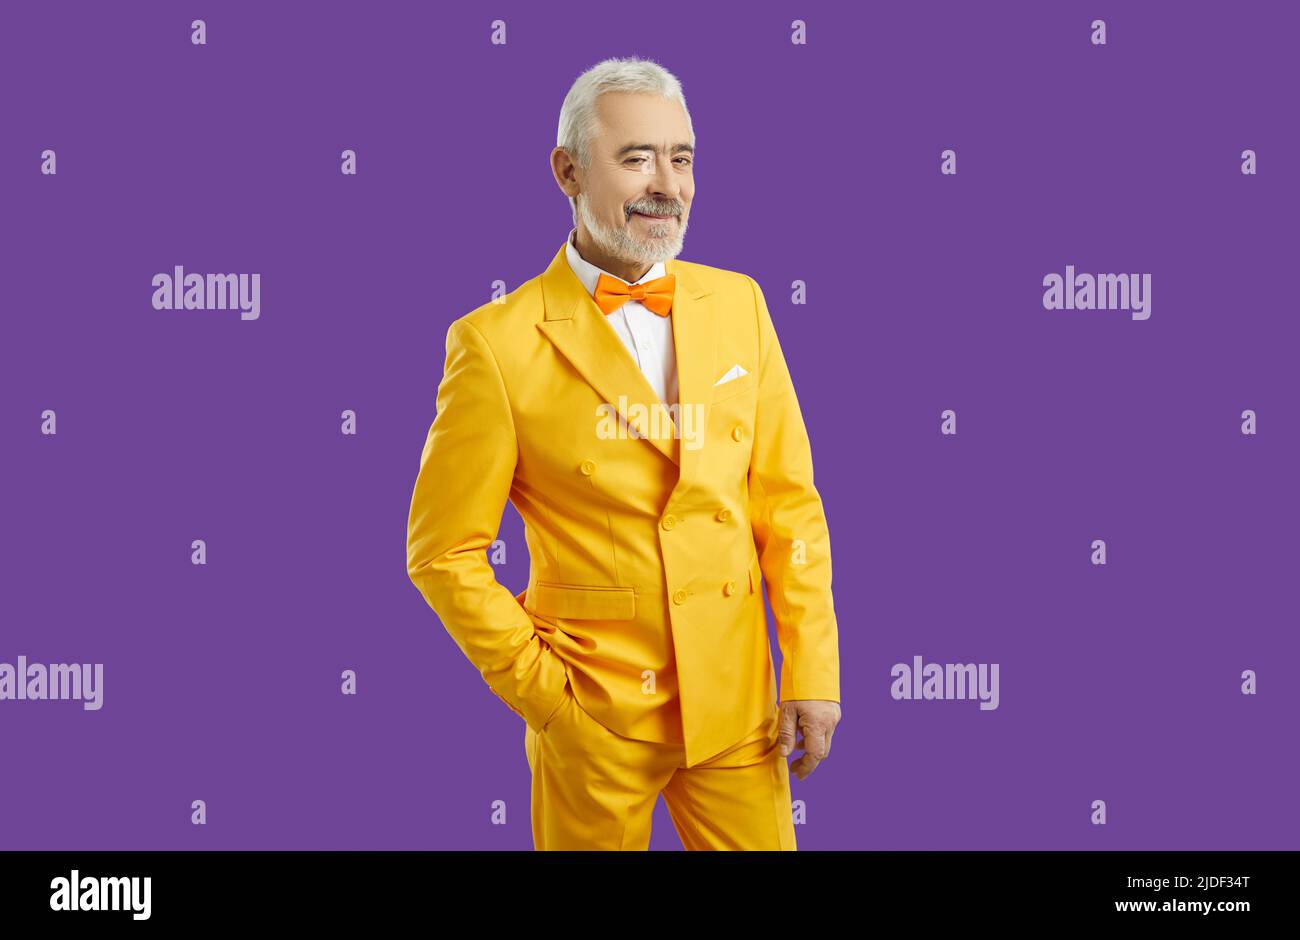 Handsome man wearing stylish yellow suit smiling at camera, happy and wealthy Stock Photo